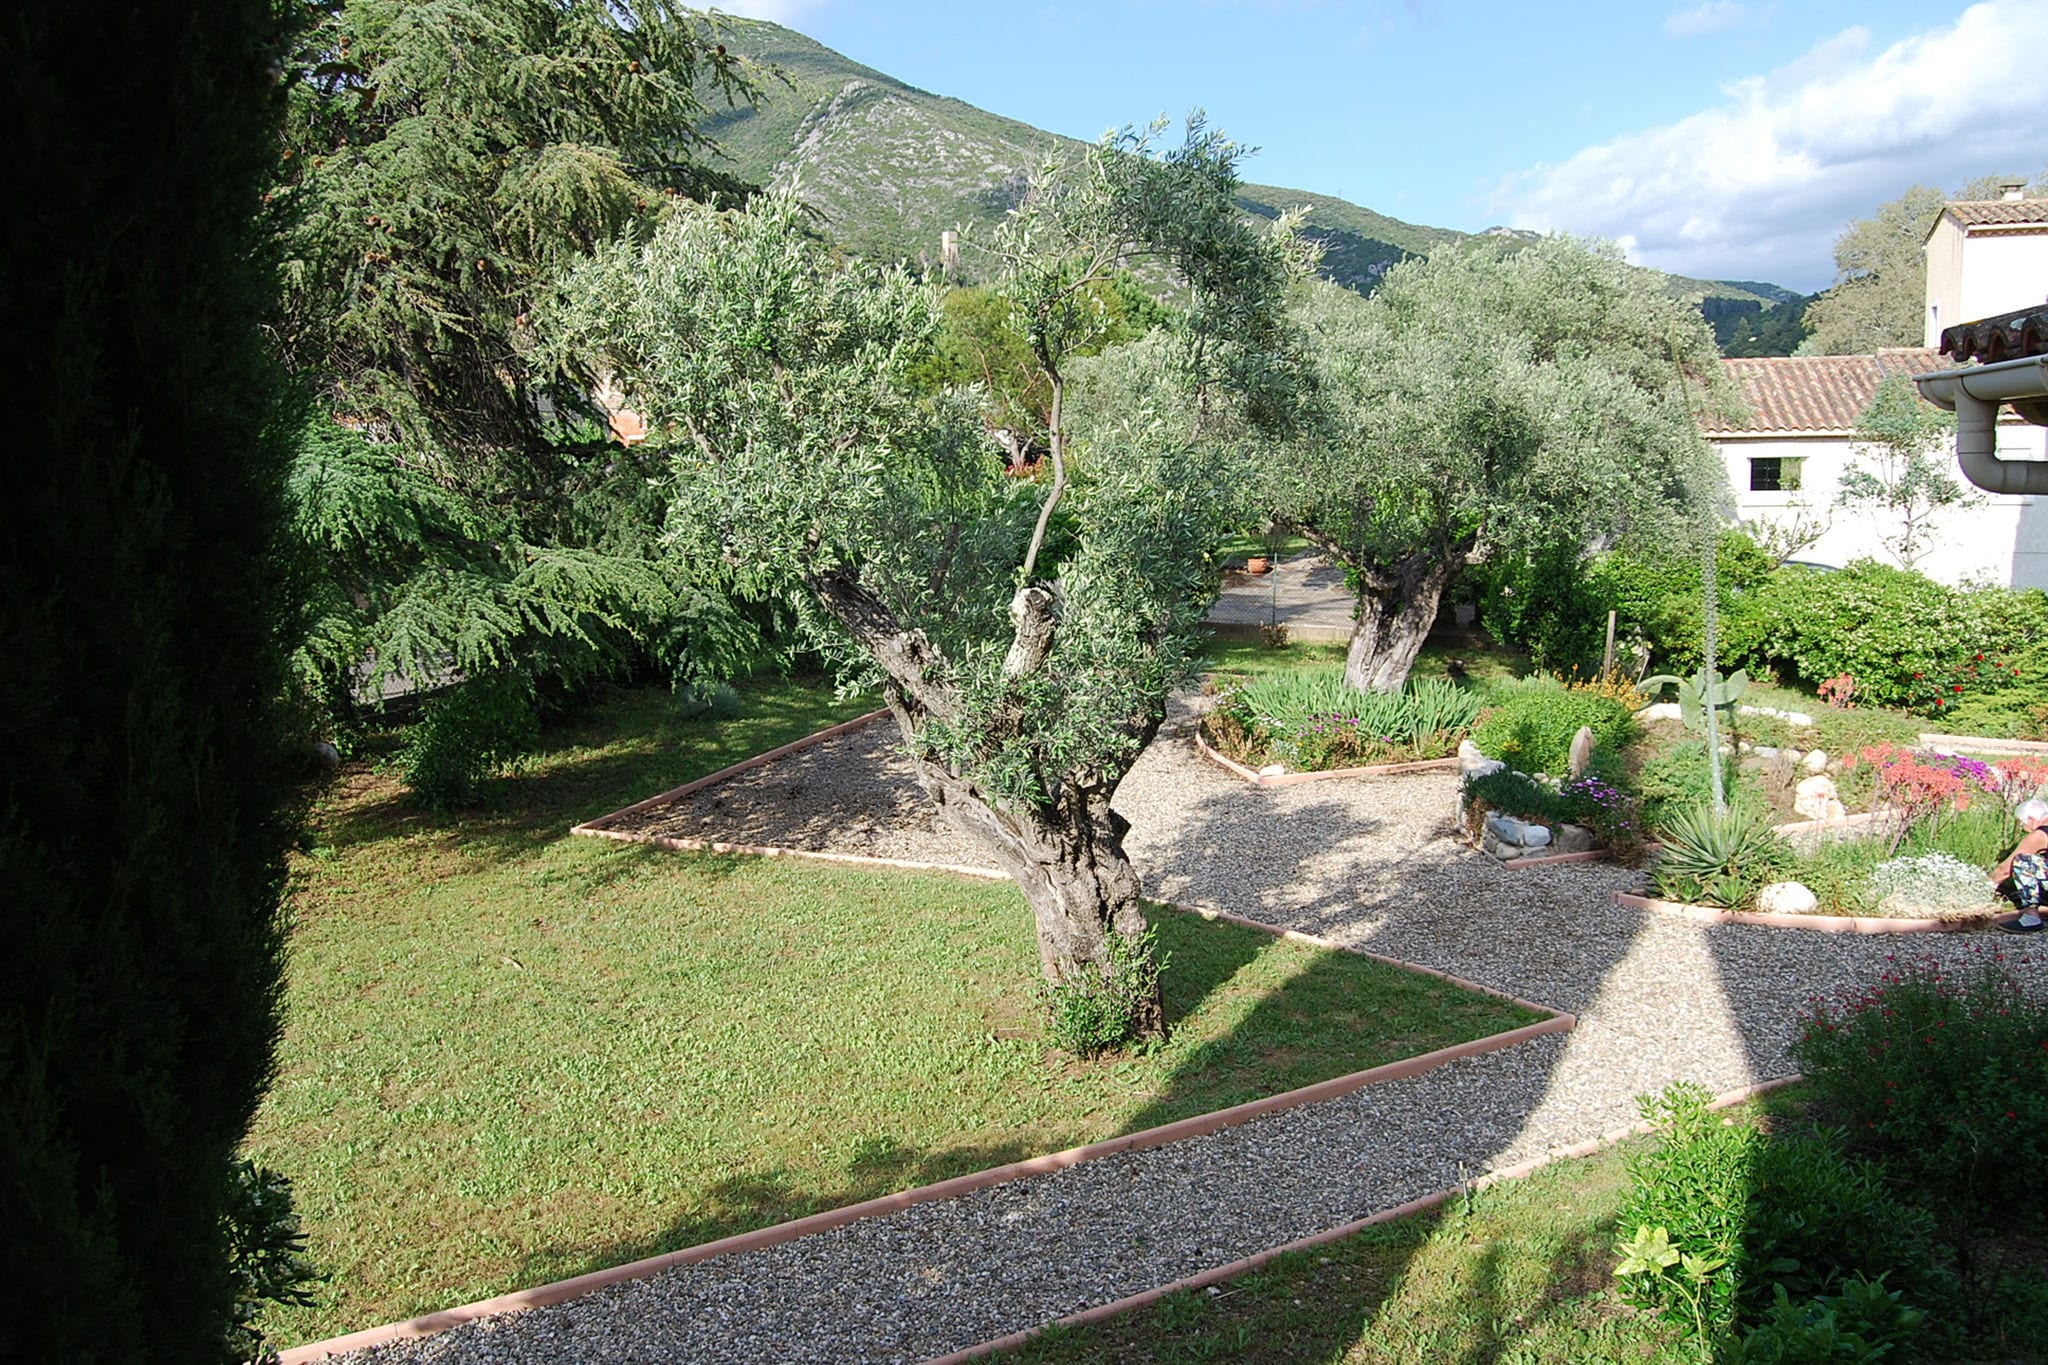 Child & dog friendly villa with private swimming pool and fenced garden on the river